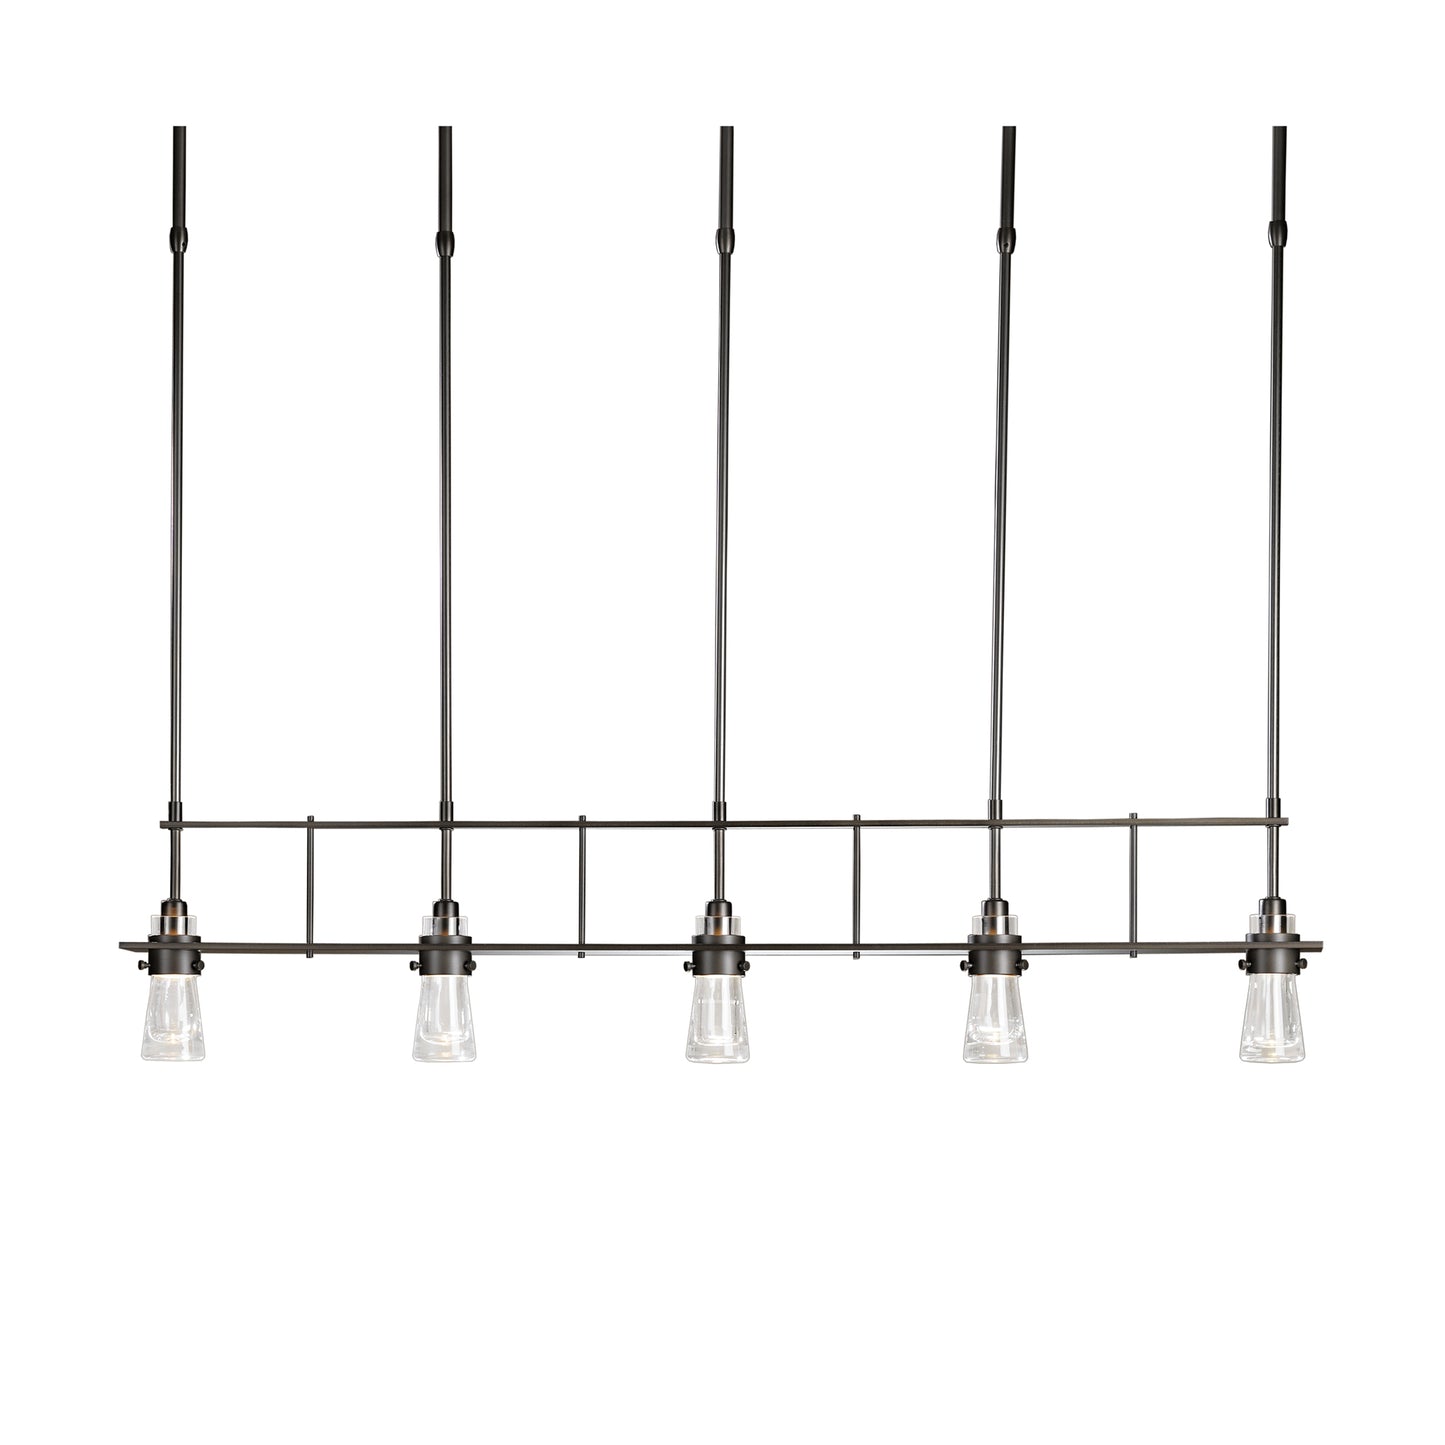 An "Erlenmeyer 5-Light Pendant" fixture by Hubbardton Forge with a metal frame.